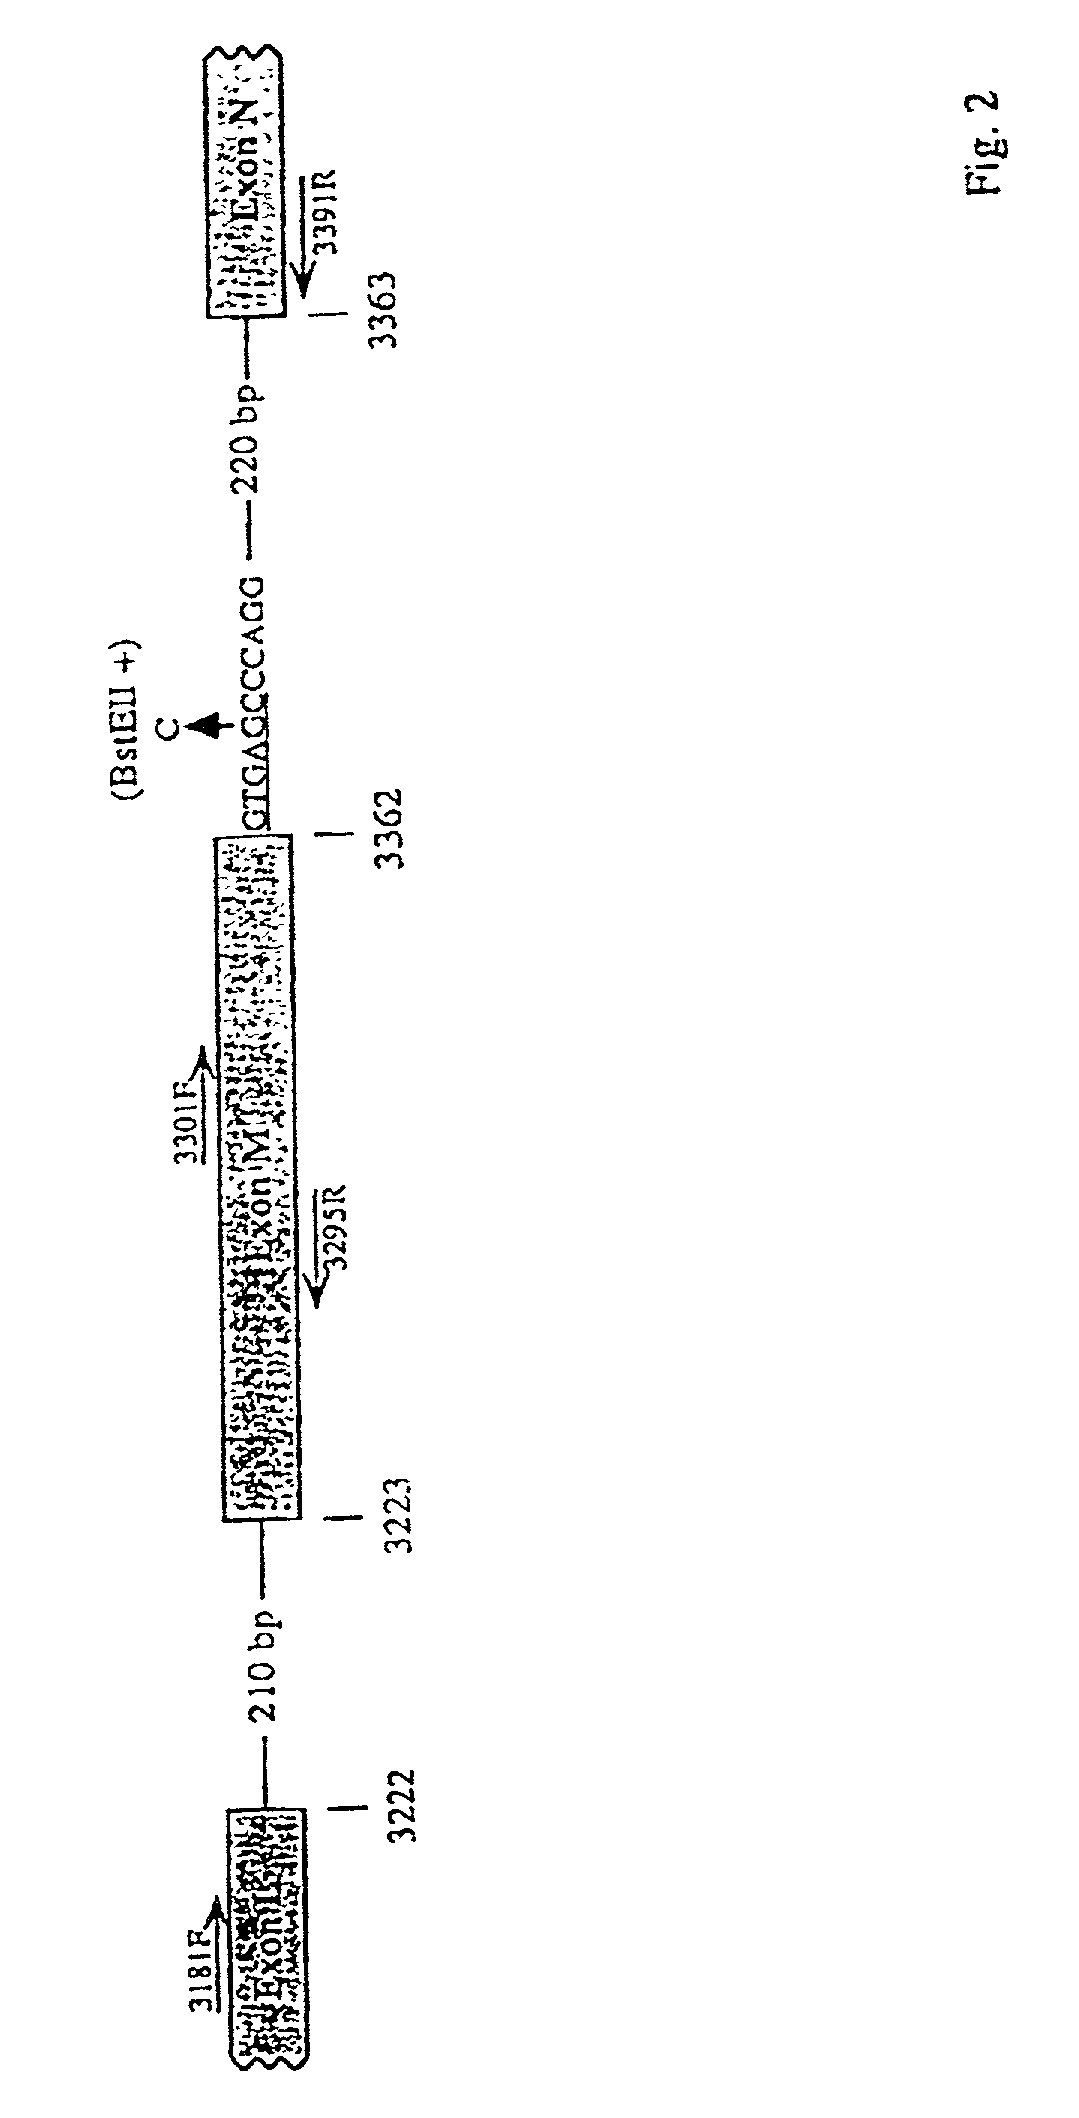 Methods for detecting mutations associated with hypertrophic cardiomyopathy